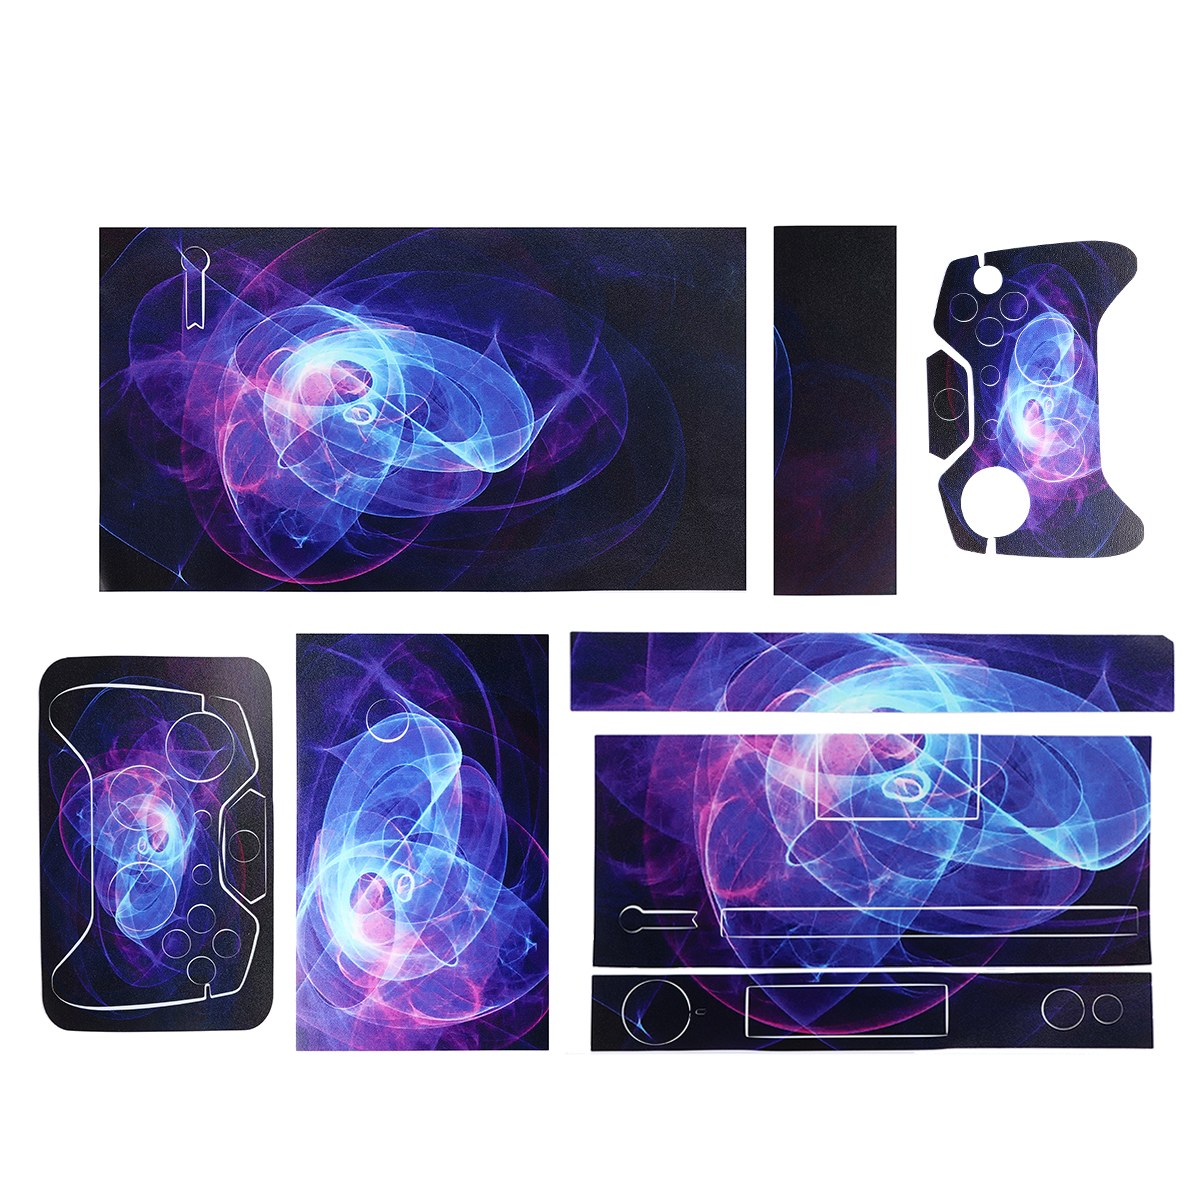 Purple Protective Vinyl Decal Skin Stickers Wrap Cover For Xbox One Game Console Game Controller Kinect 6